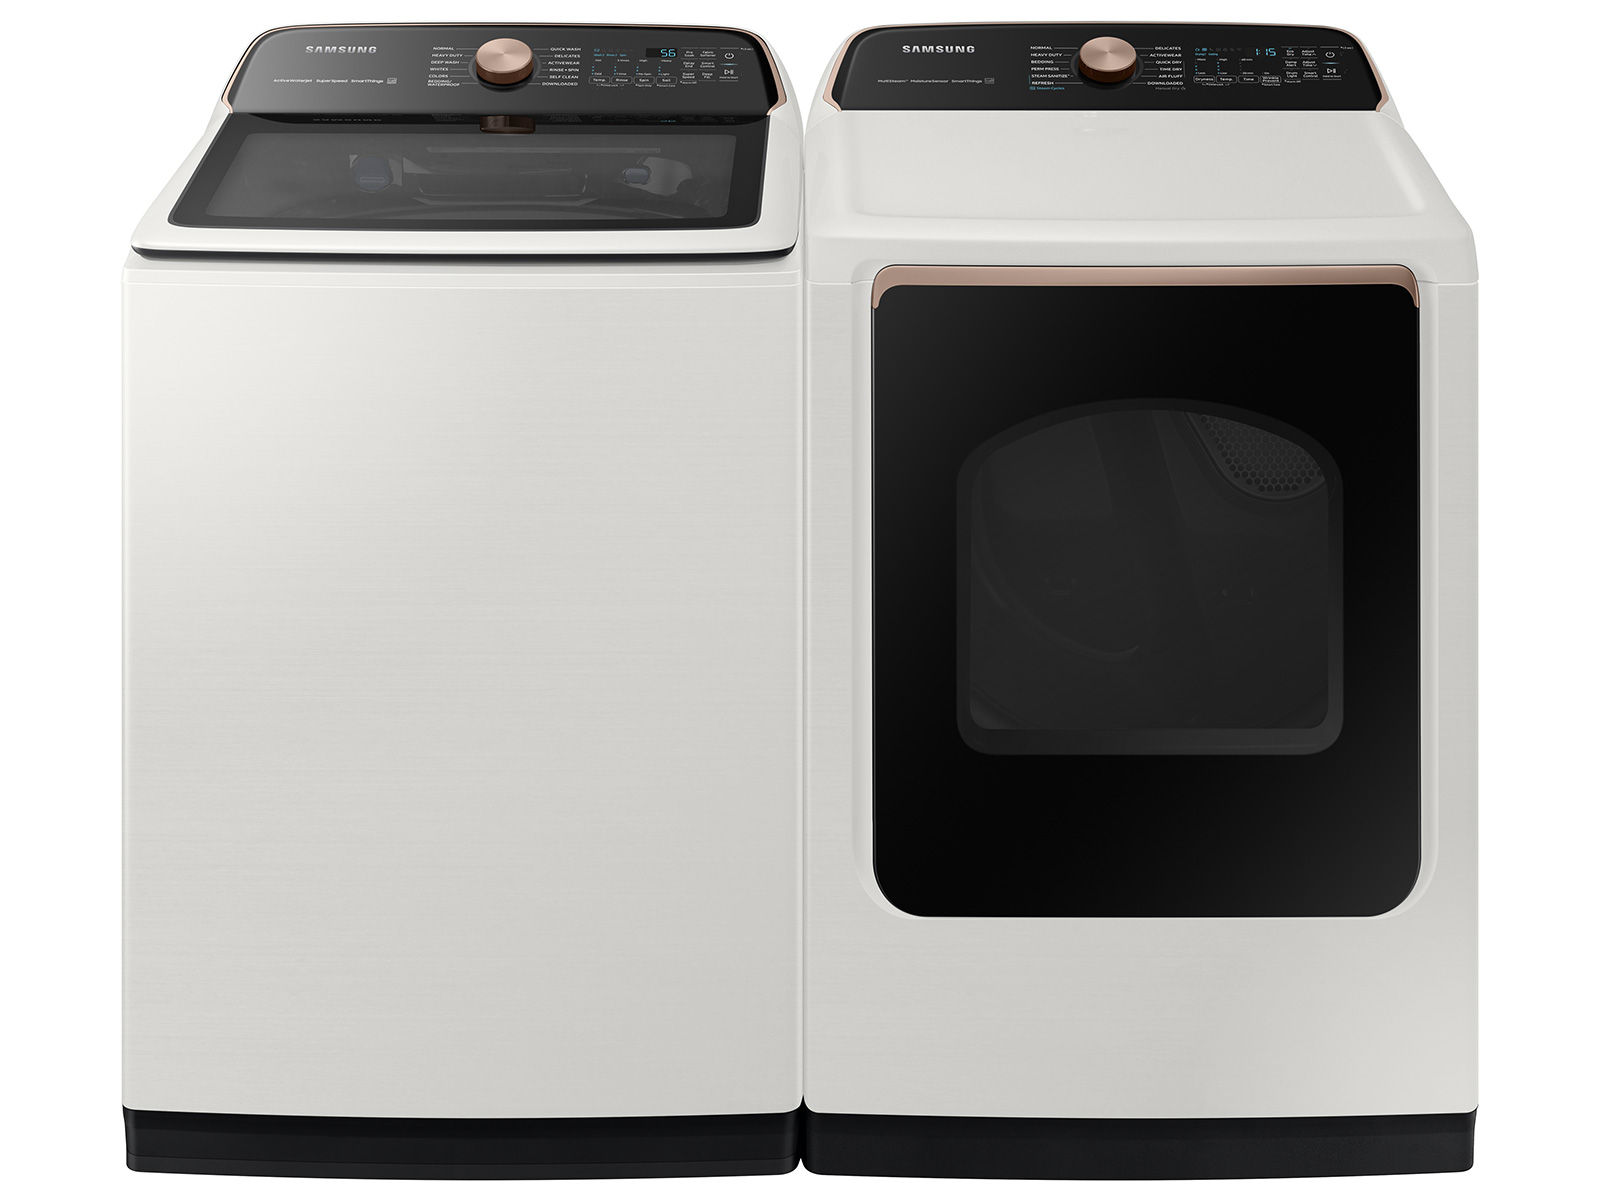 Samsung top load washer and dryer with gold detailing